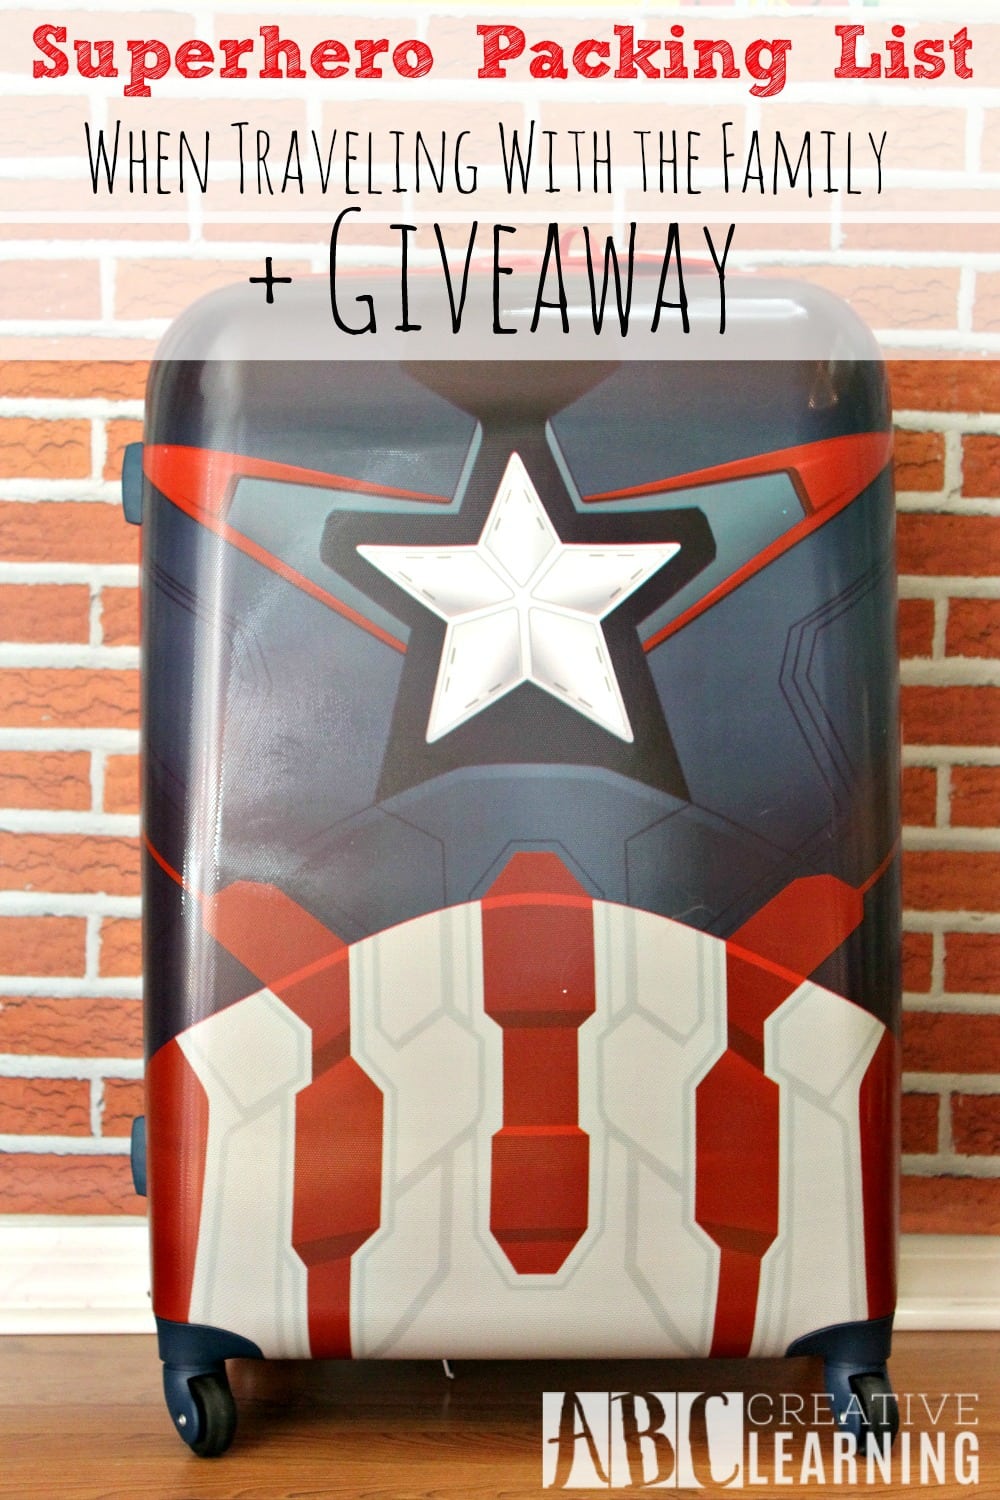 Superhero Packing List When Traveling With The Family + Giveaway